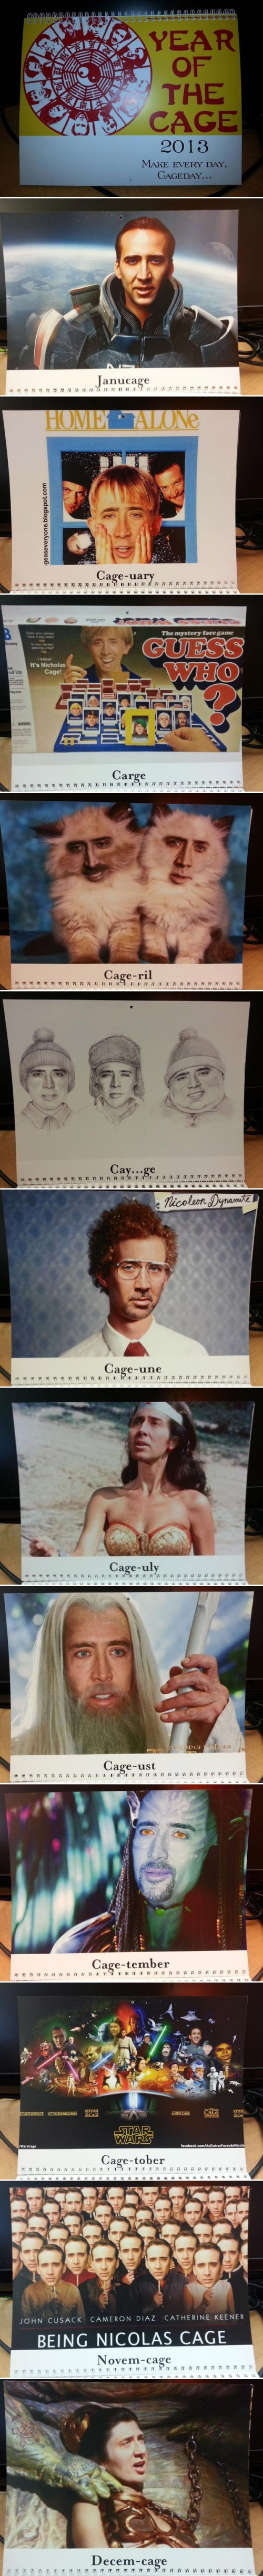 The year of the Cage